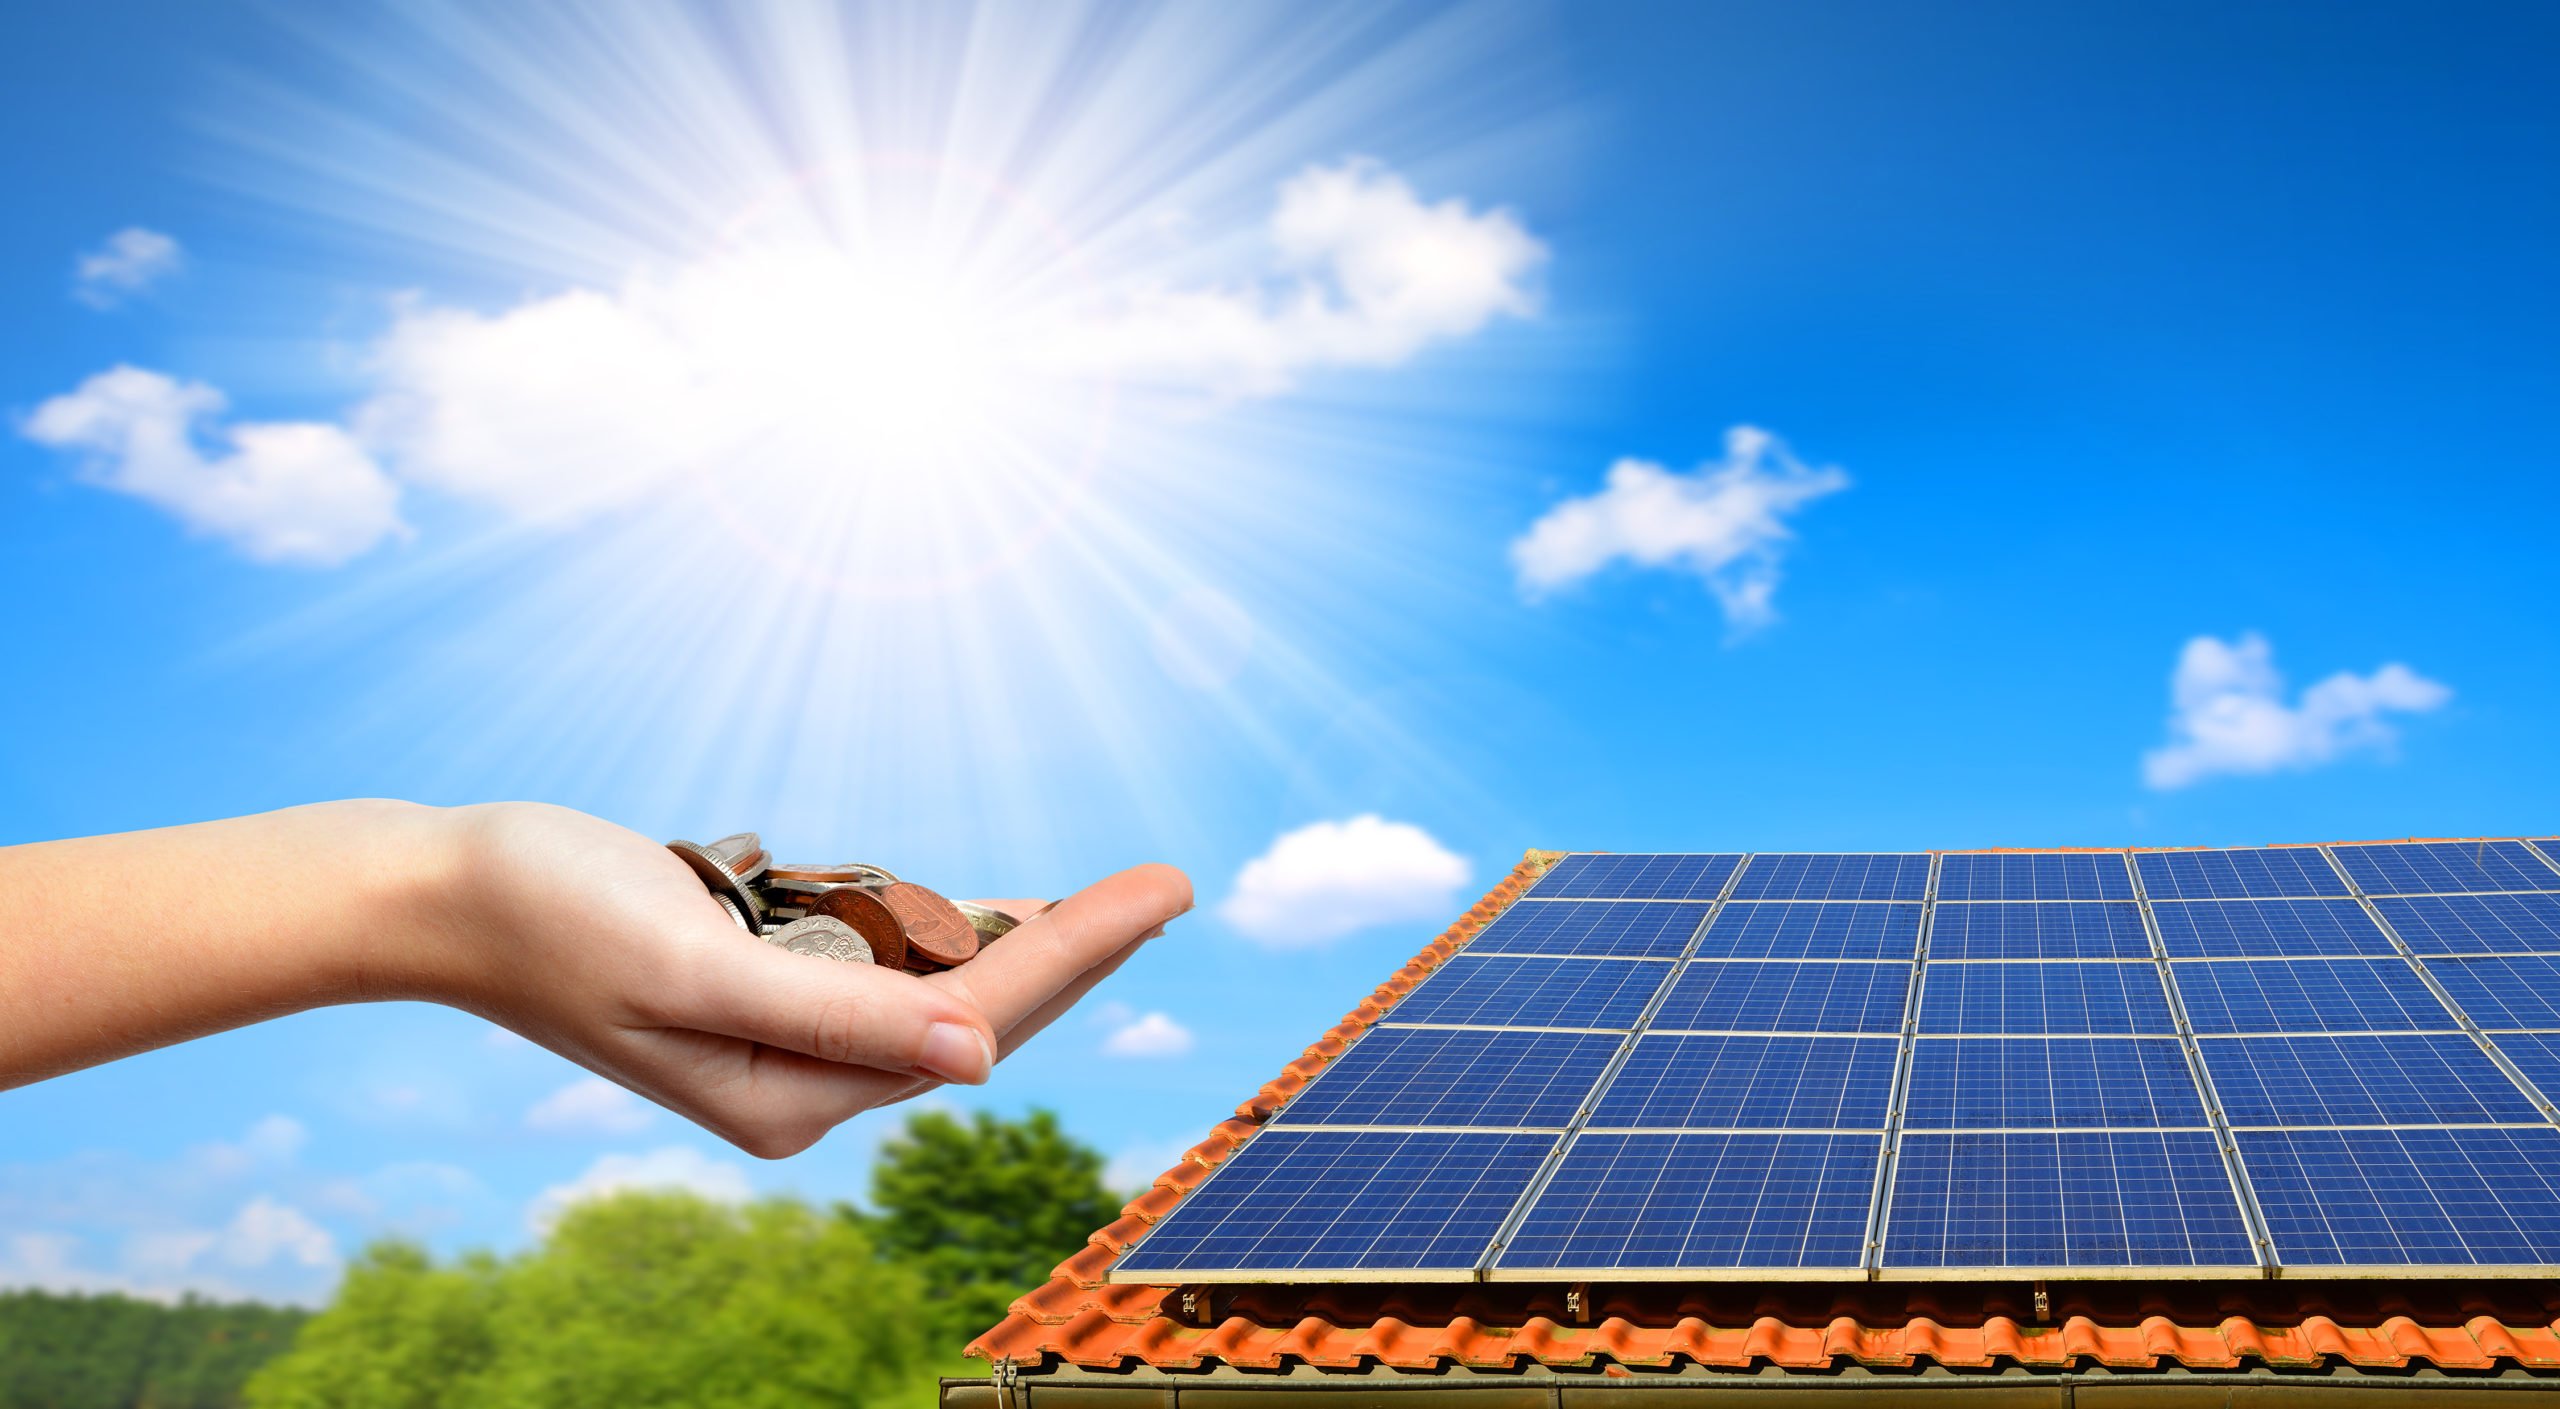 How Much Do Solar Panels Cost To Maintain?